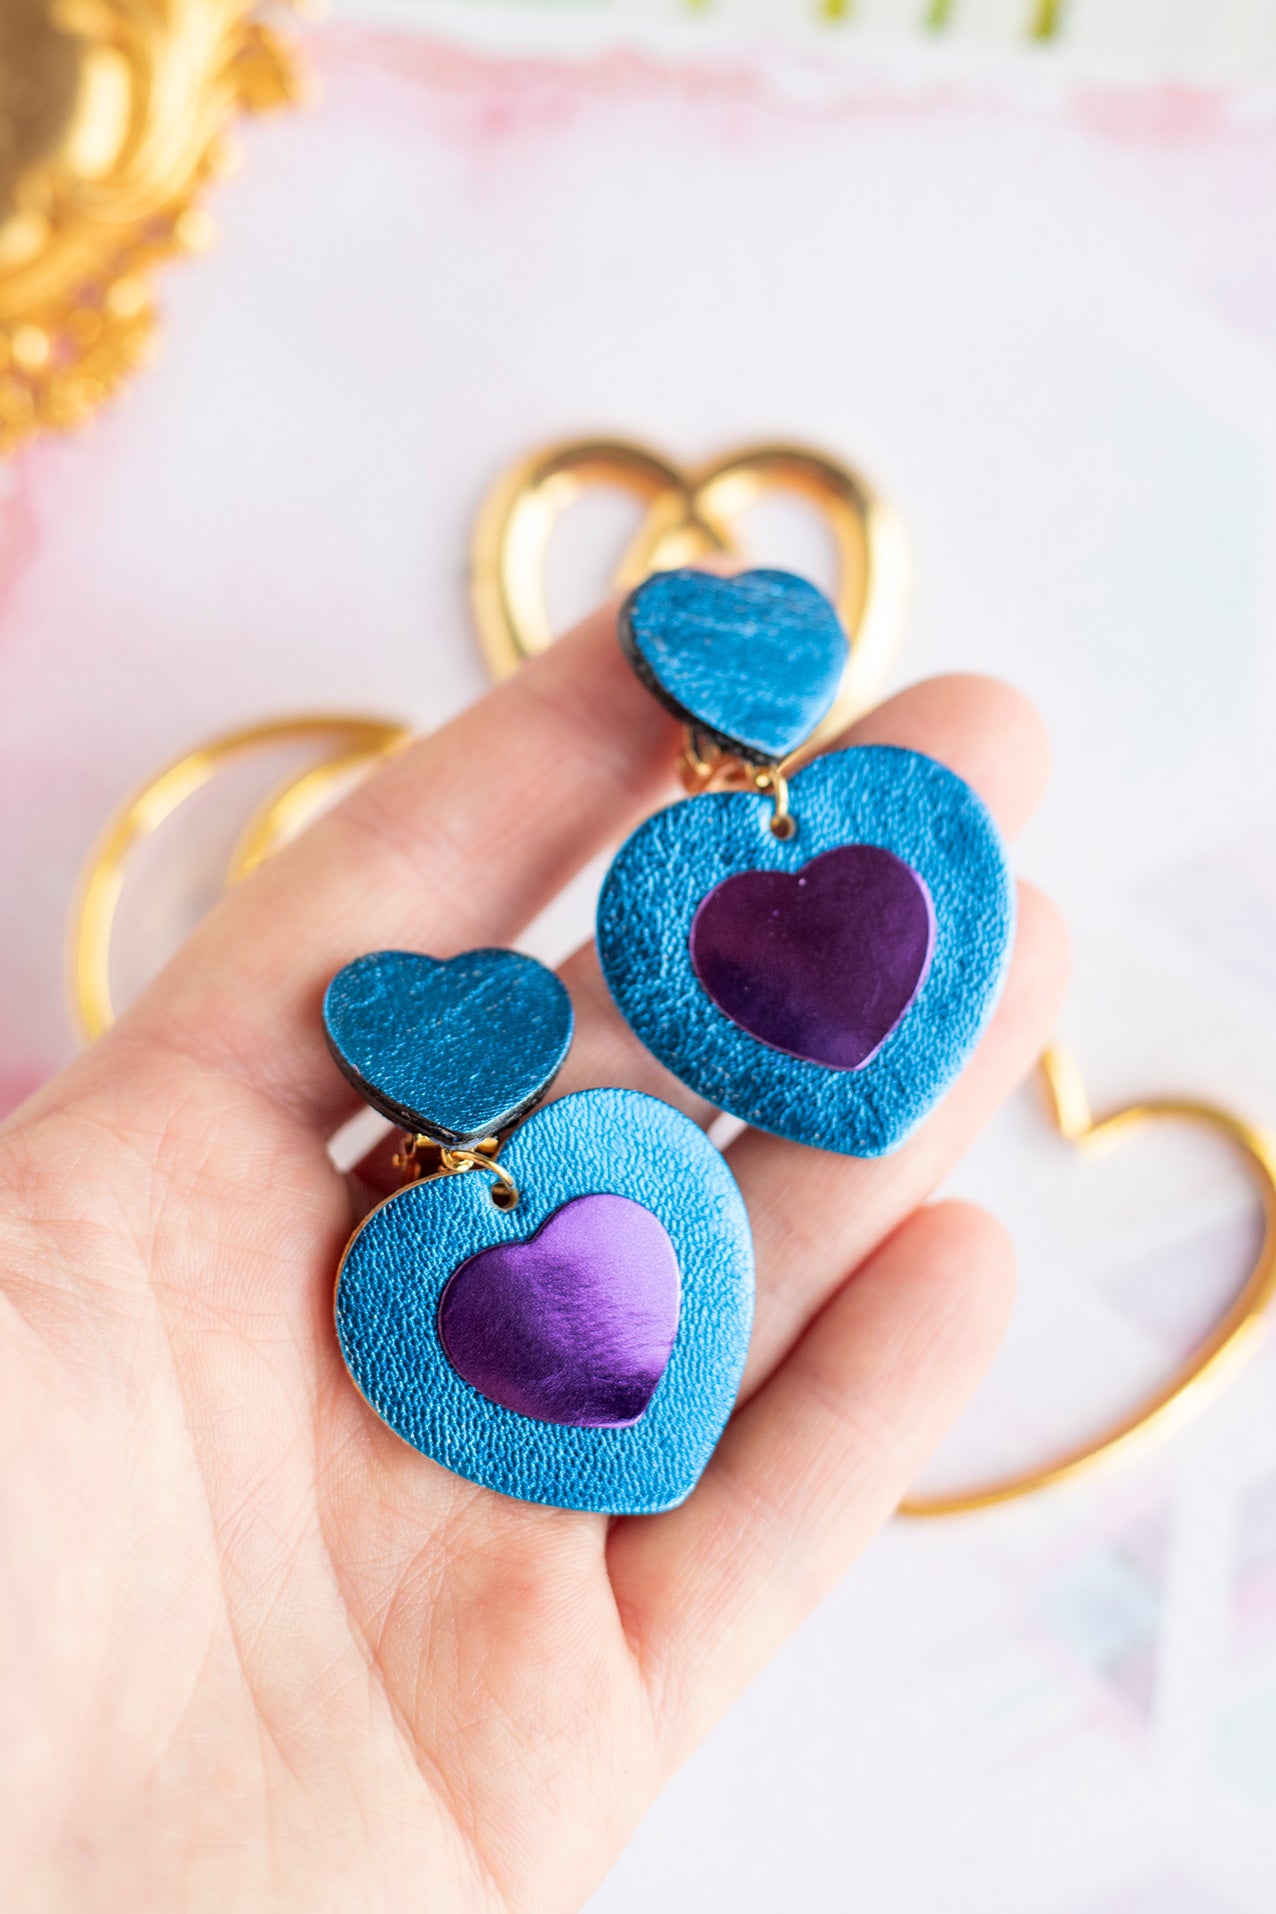 Double Hearts clip-on earrings - metallic blue and purple leather